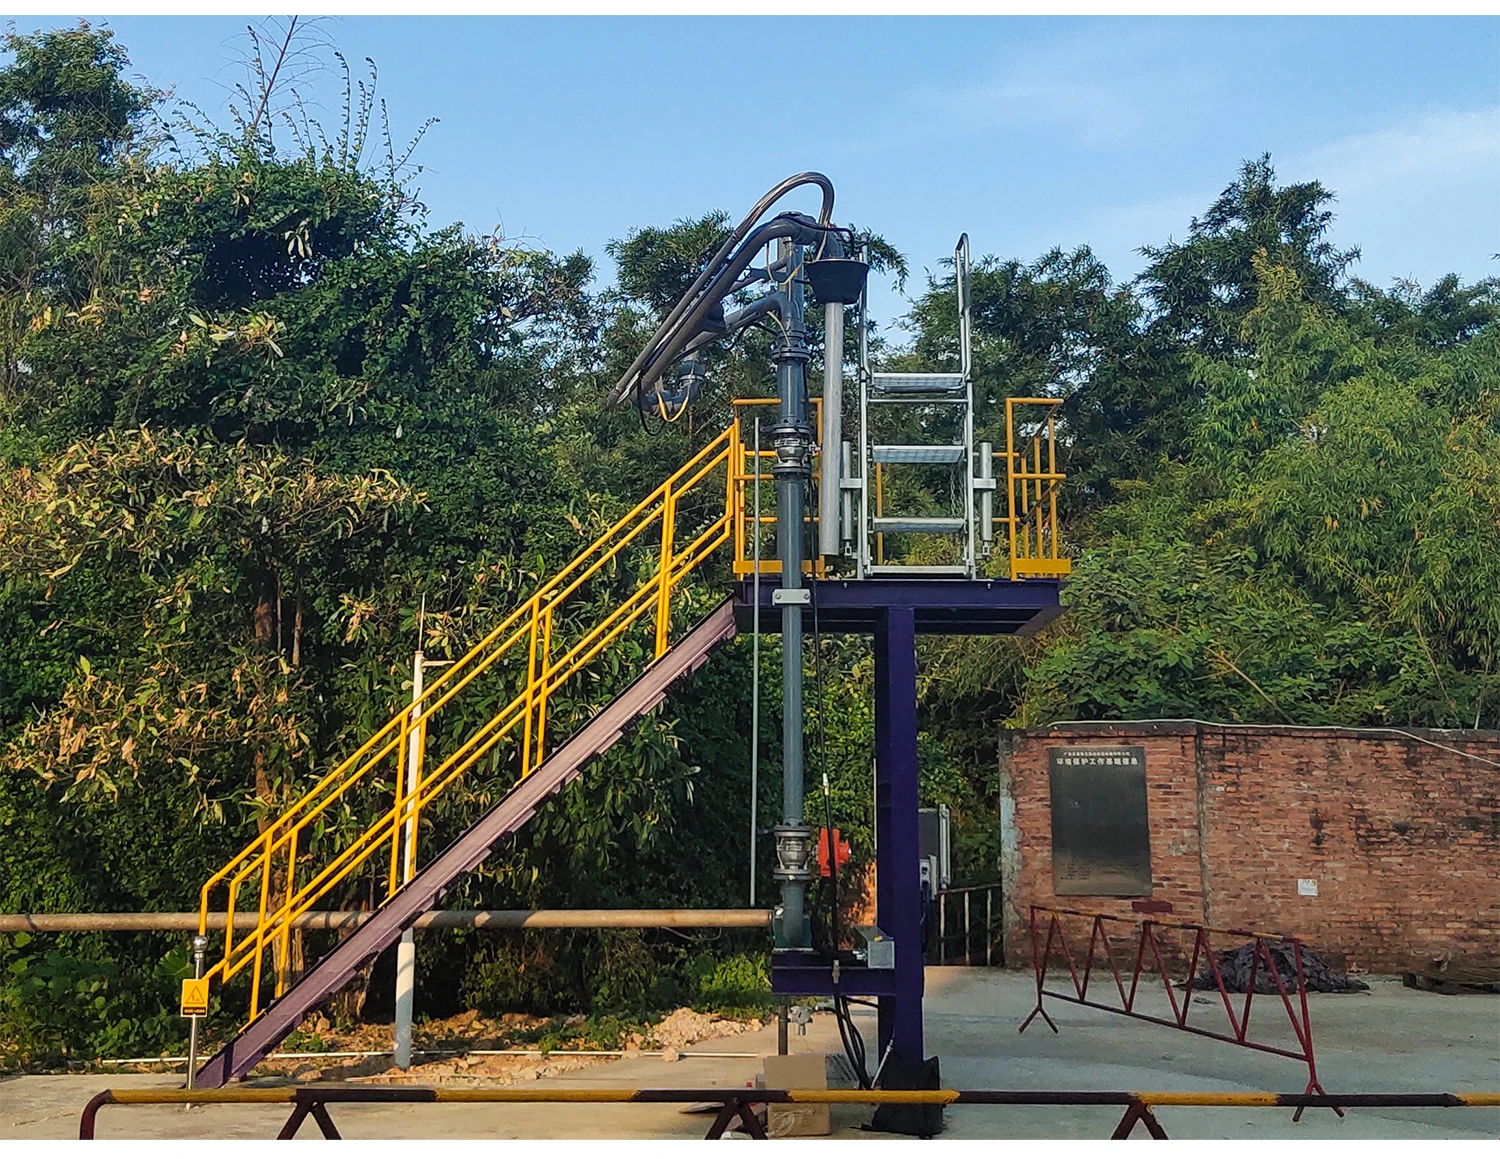 handle easier and work stable Oil Loading Control skid mounted System for petrochemical industry